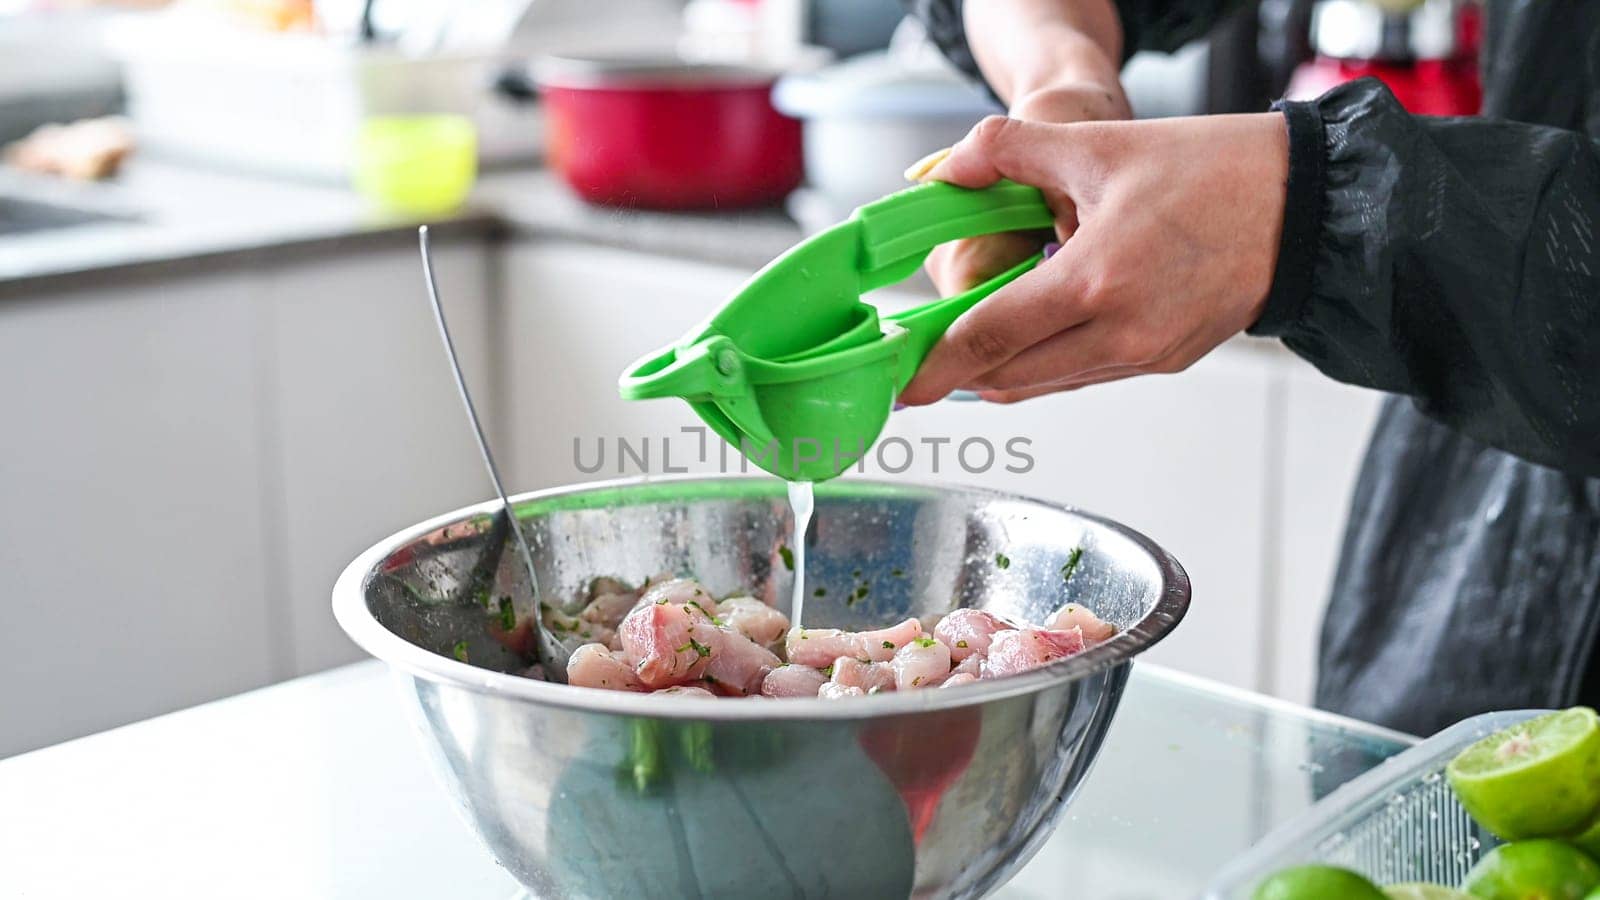 Peruvian food ceviche. 4 Preparation of ceviche, squeezing lemon by Peruphotoart